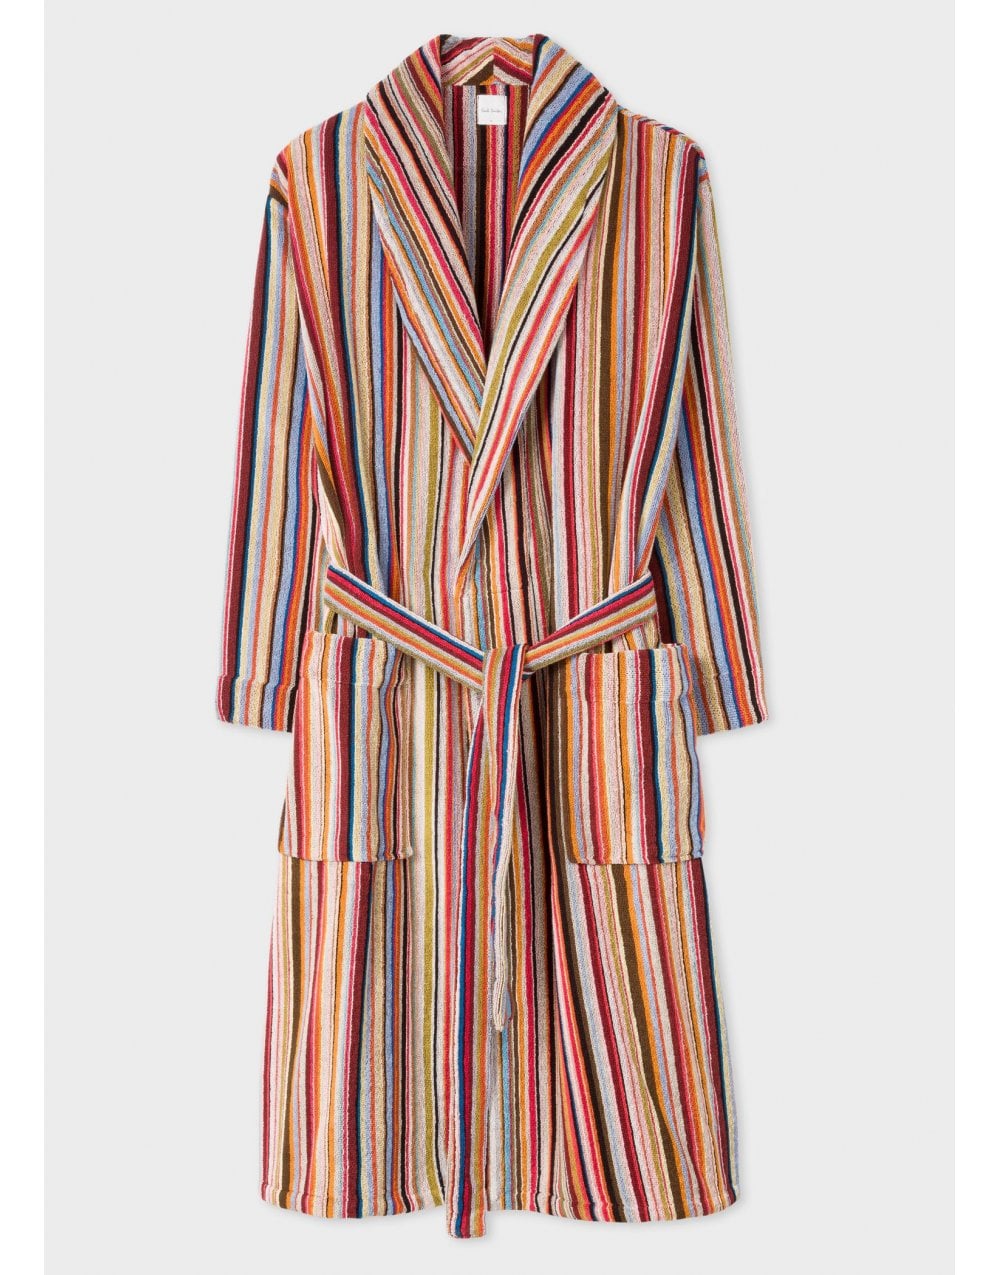 Paul Smith Multi Stripe Towelling Dressing Gown